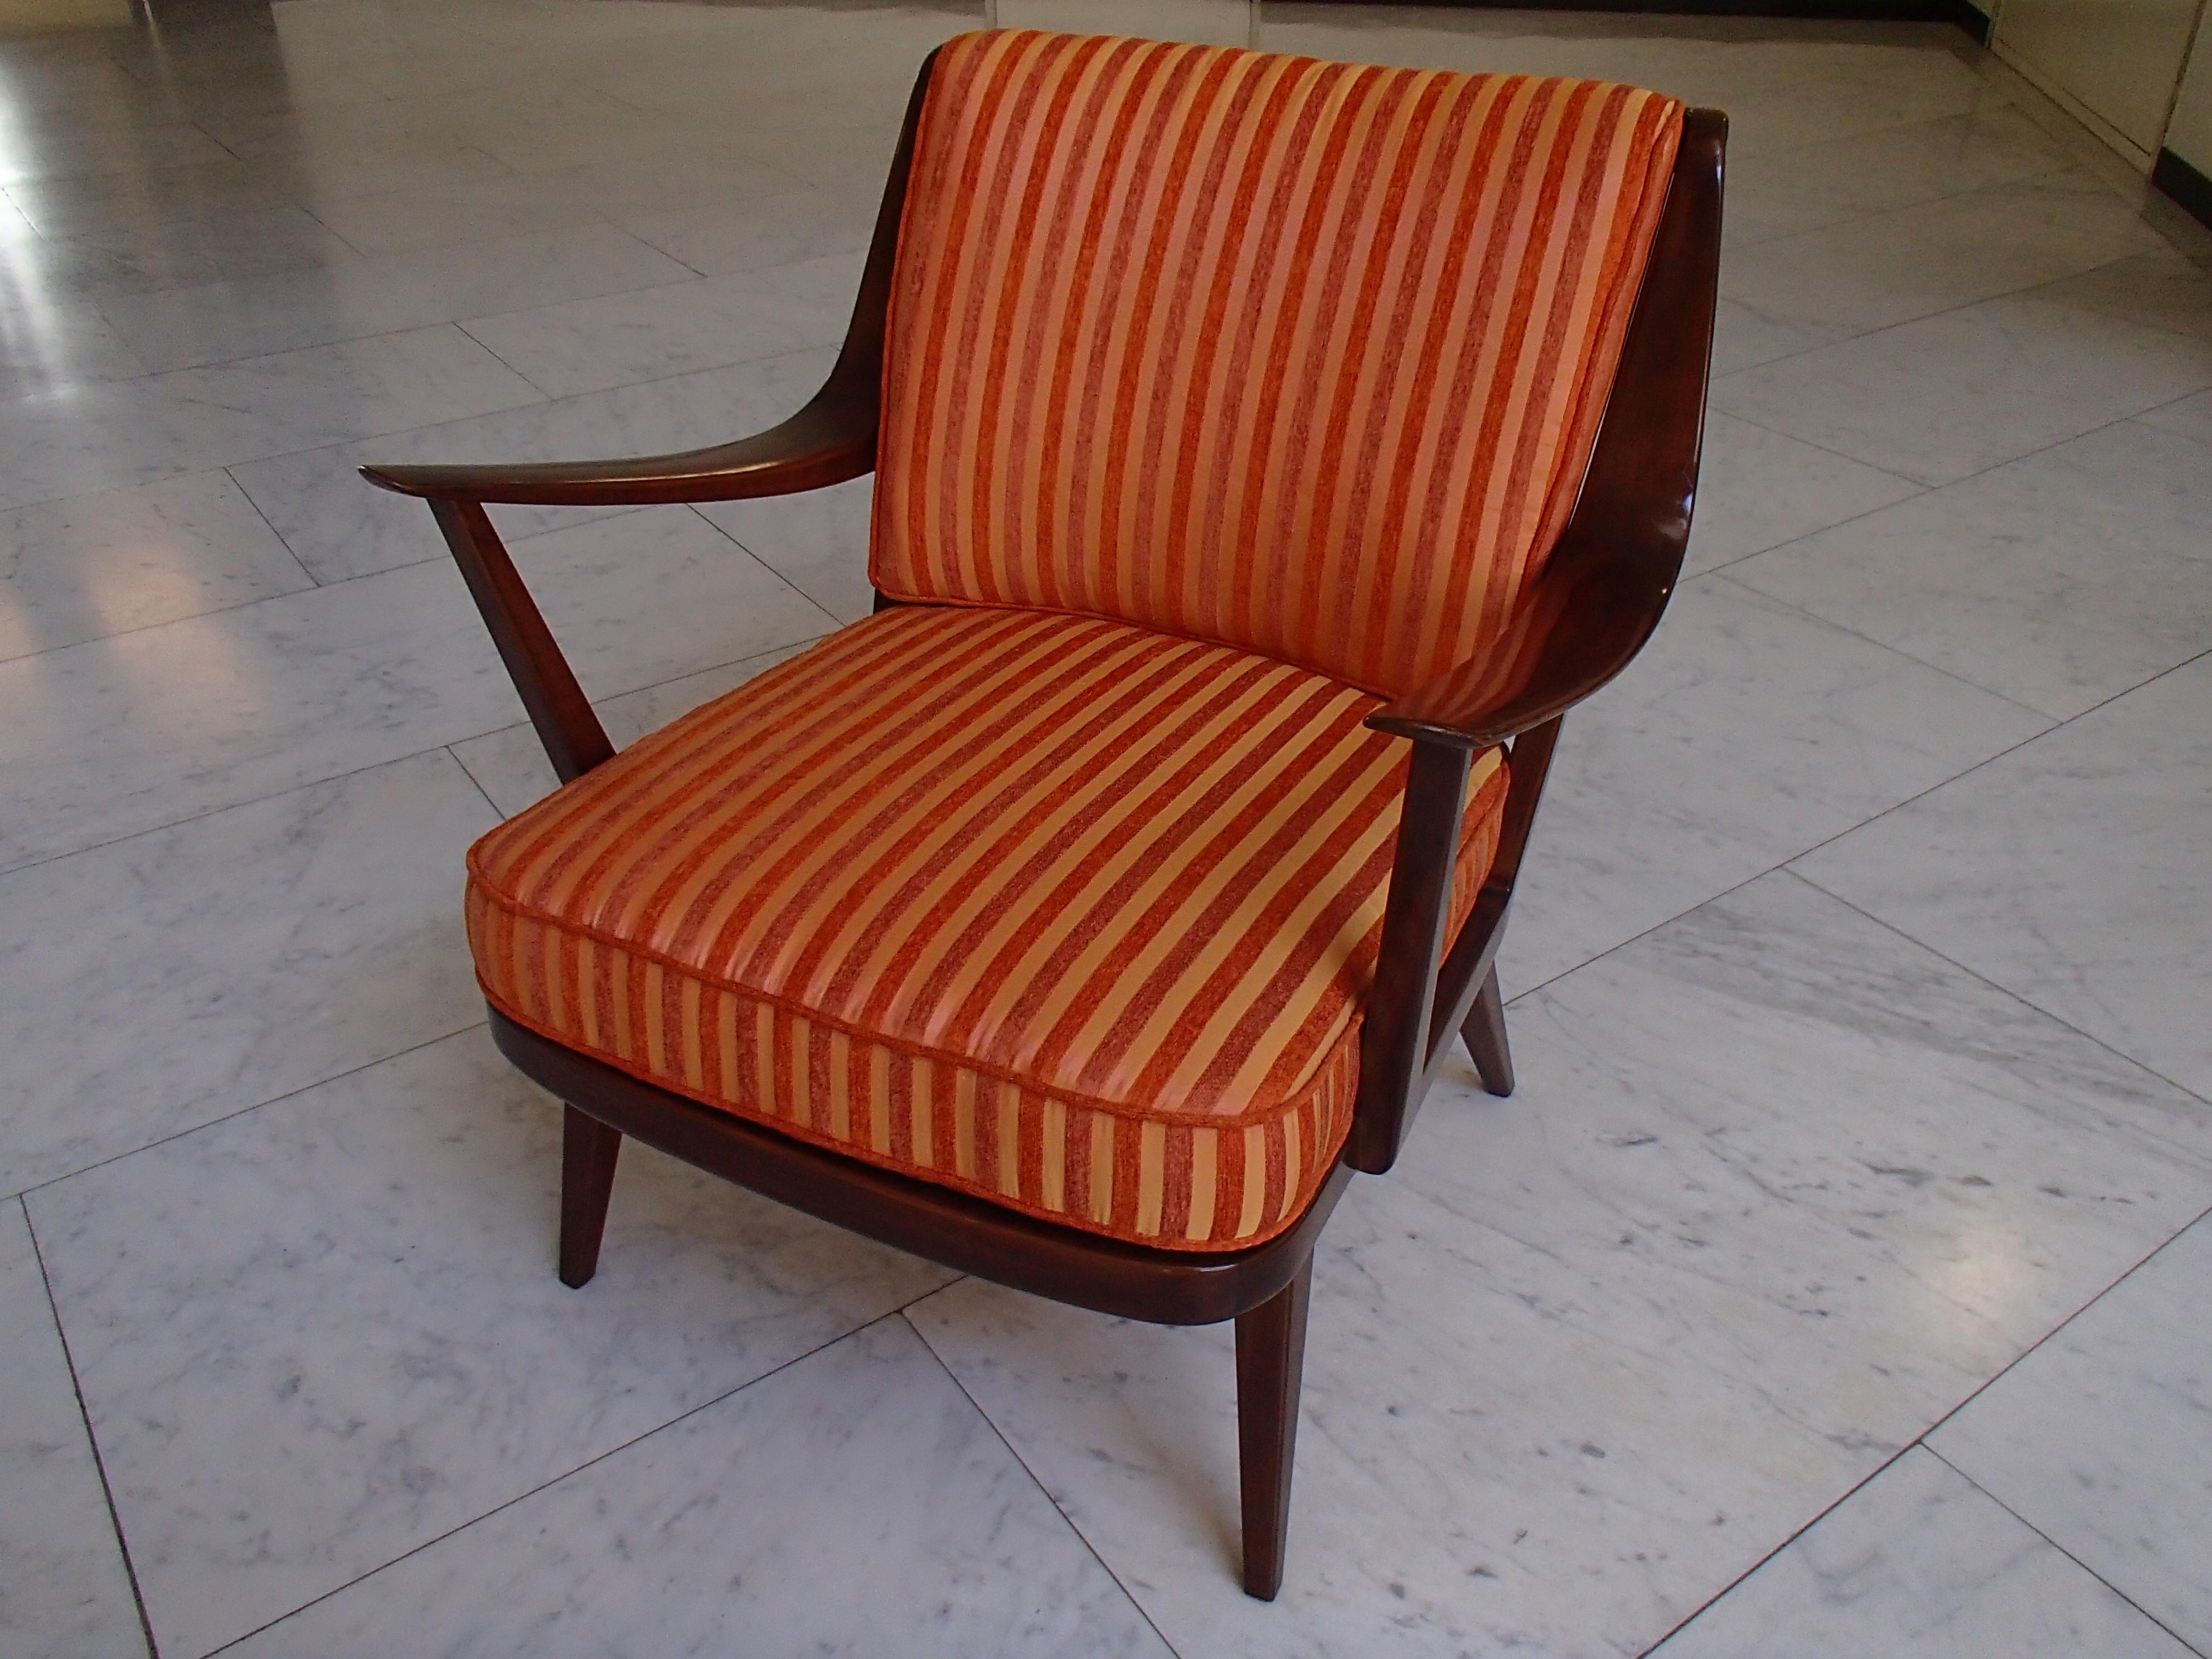 Mid-Century Modern armchair by Knoll Antimott cushions in various orange tones stripes new recovered.